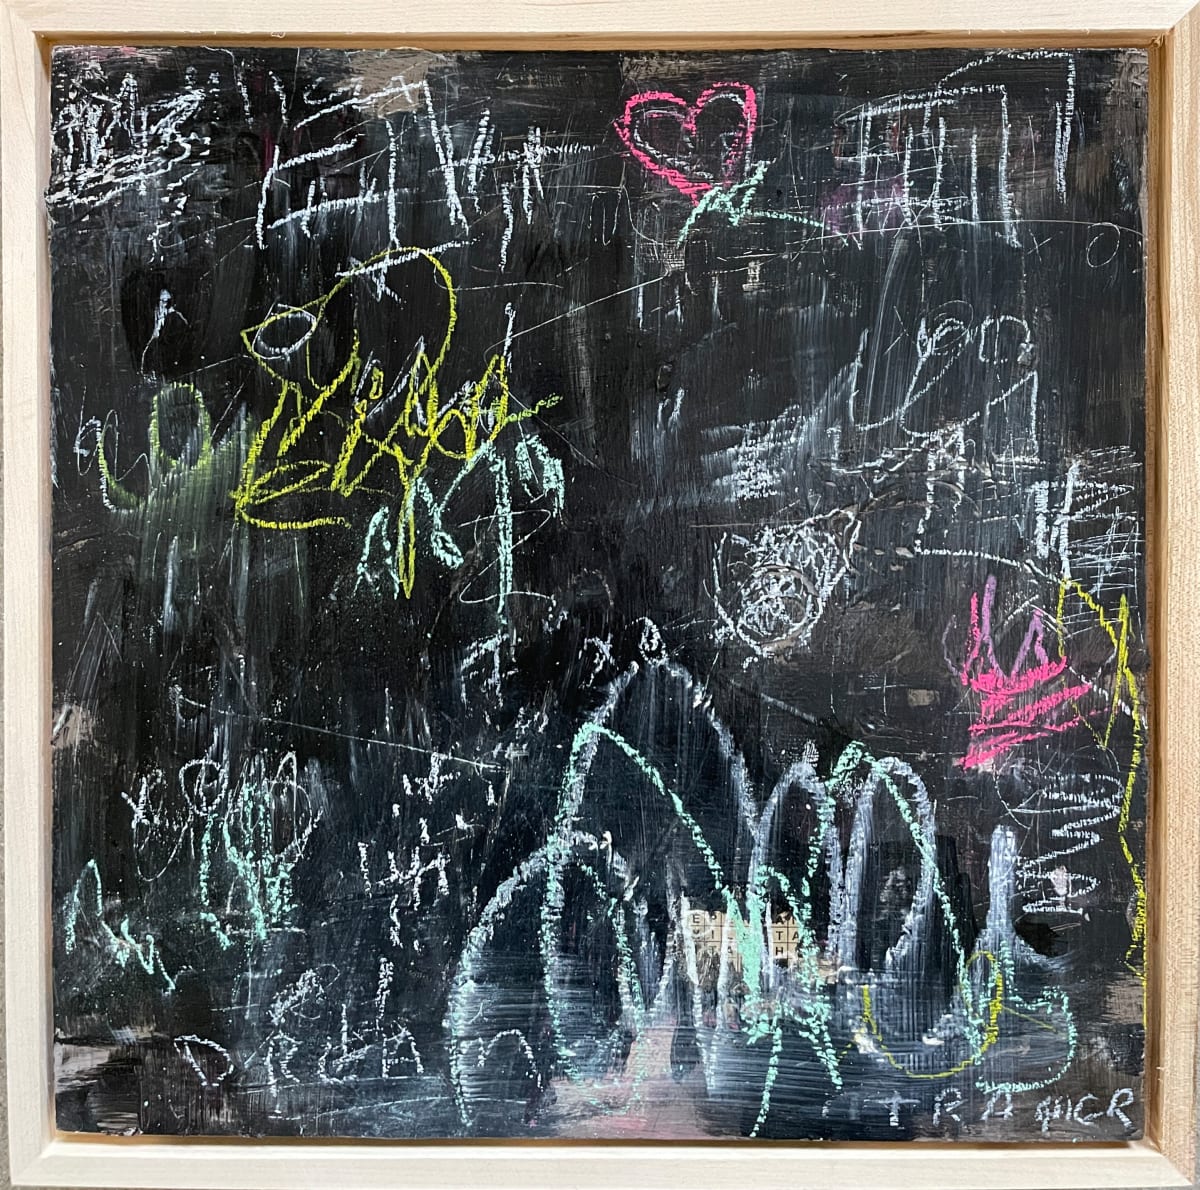 Stop Scribbling On The Walls by Miriam Traher  Image: Have fun creating your SQUARE FOOT gallery wall. All pieces are 12 "x 12", excluding the frame and can be mixed and mingled to create your unique expression in your home. A grouped exhibition makes a visual architectural and sculptural work dynamic and fluid as your tastes change. The size remains the same, and the frame remains the same.  Build on it, rearrange it and express your unique taste and style. Need to spice up a space? Change the pieces, move them to a new location, mix their order, buy a new one, and create a new wall of awesomeness. Created on birch rigid wood board and set in a 1.5" beautiful maple frame. Neutral and modern. Check back often for new and exciting additions to add to your wall of awesomeness.
